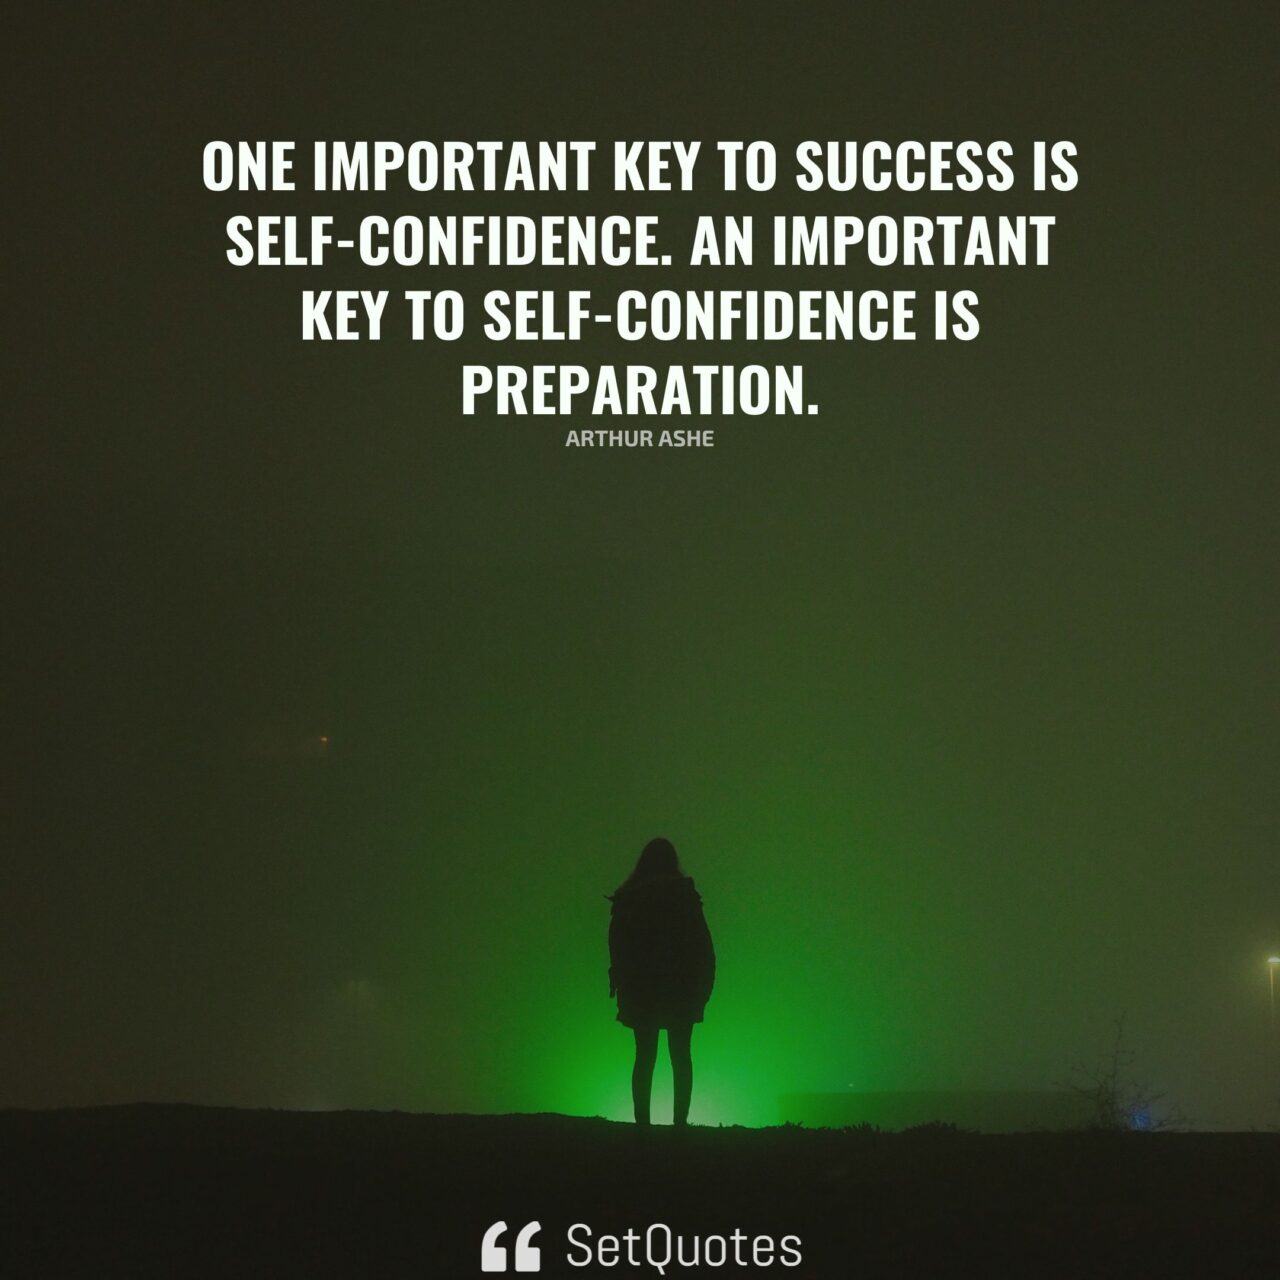 One important key to success is self-confidence.